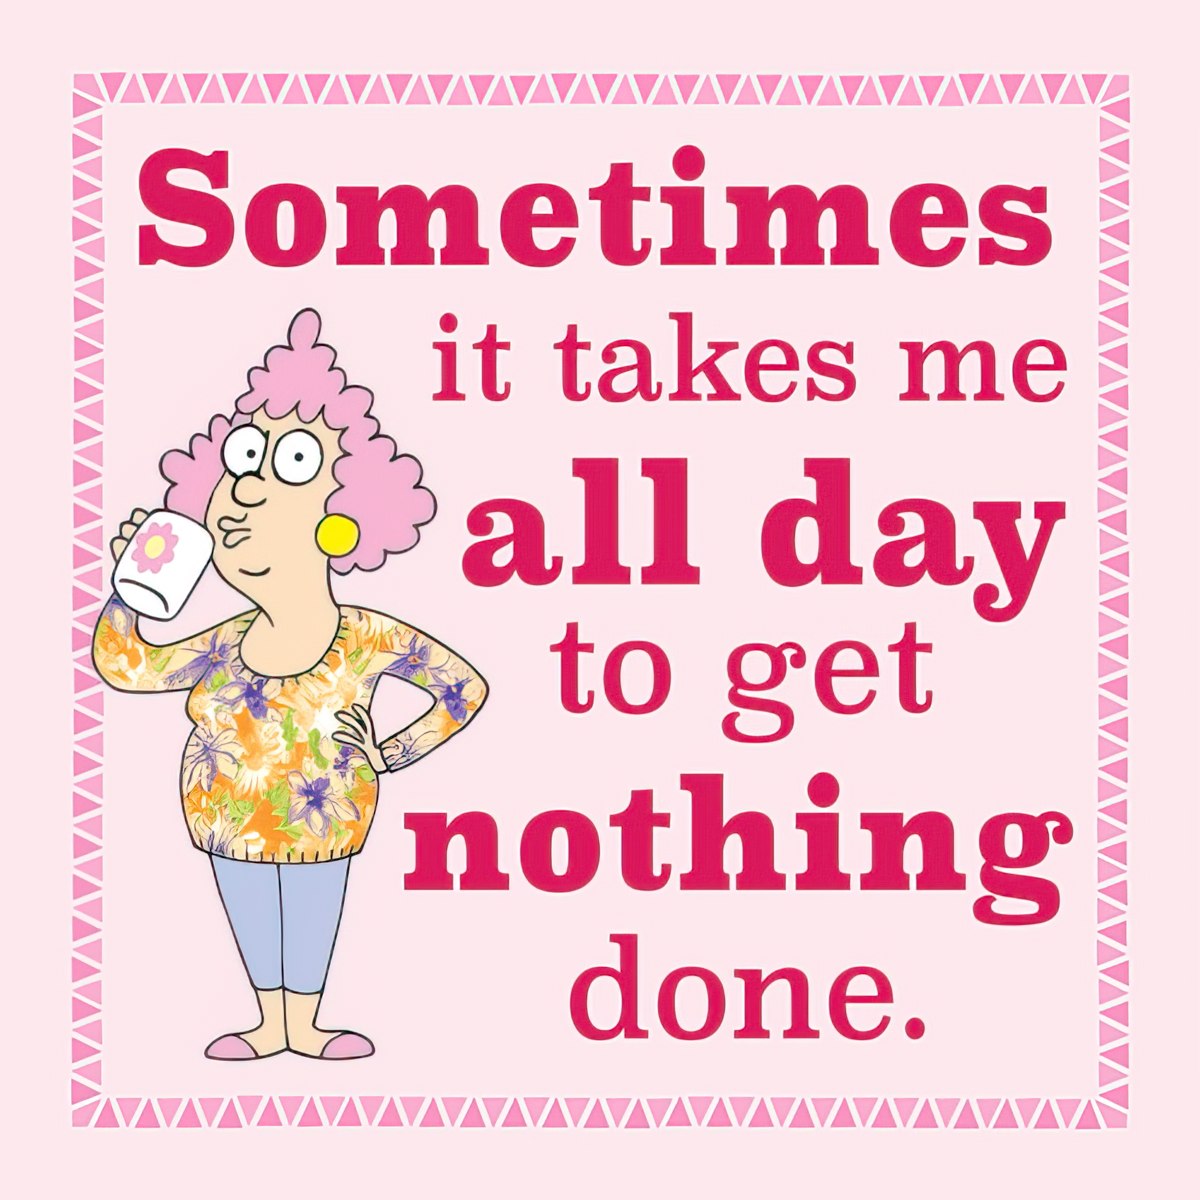 Sometimes it takes me ALL DAY to get NOTHING done.